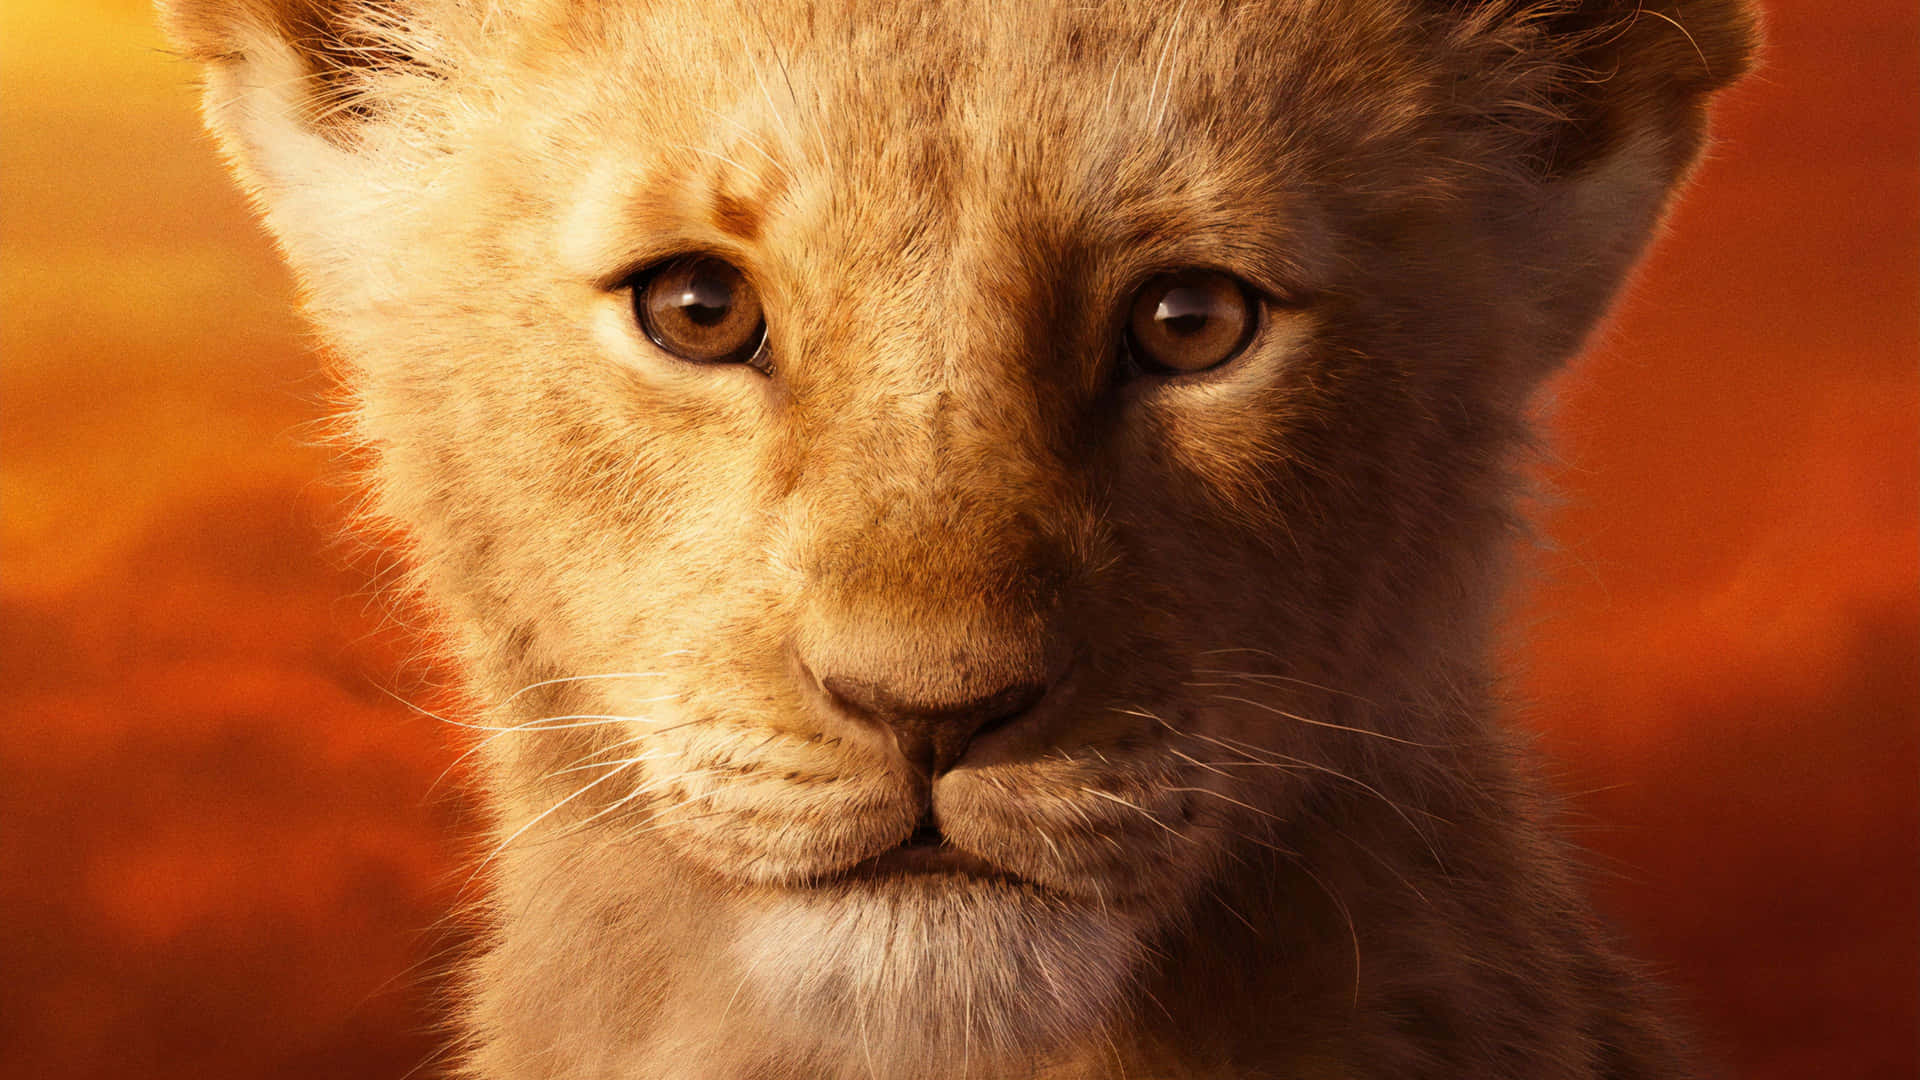 The Lion King Movie Poster Wallpaper